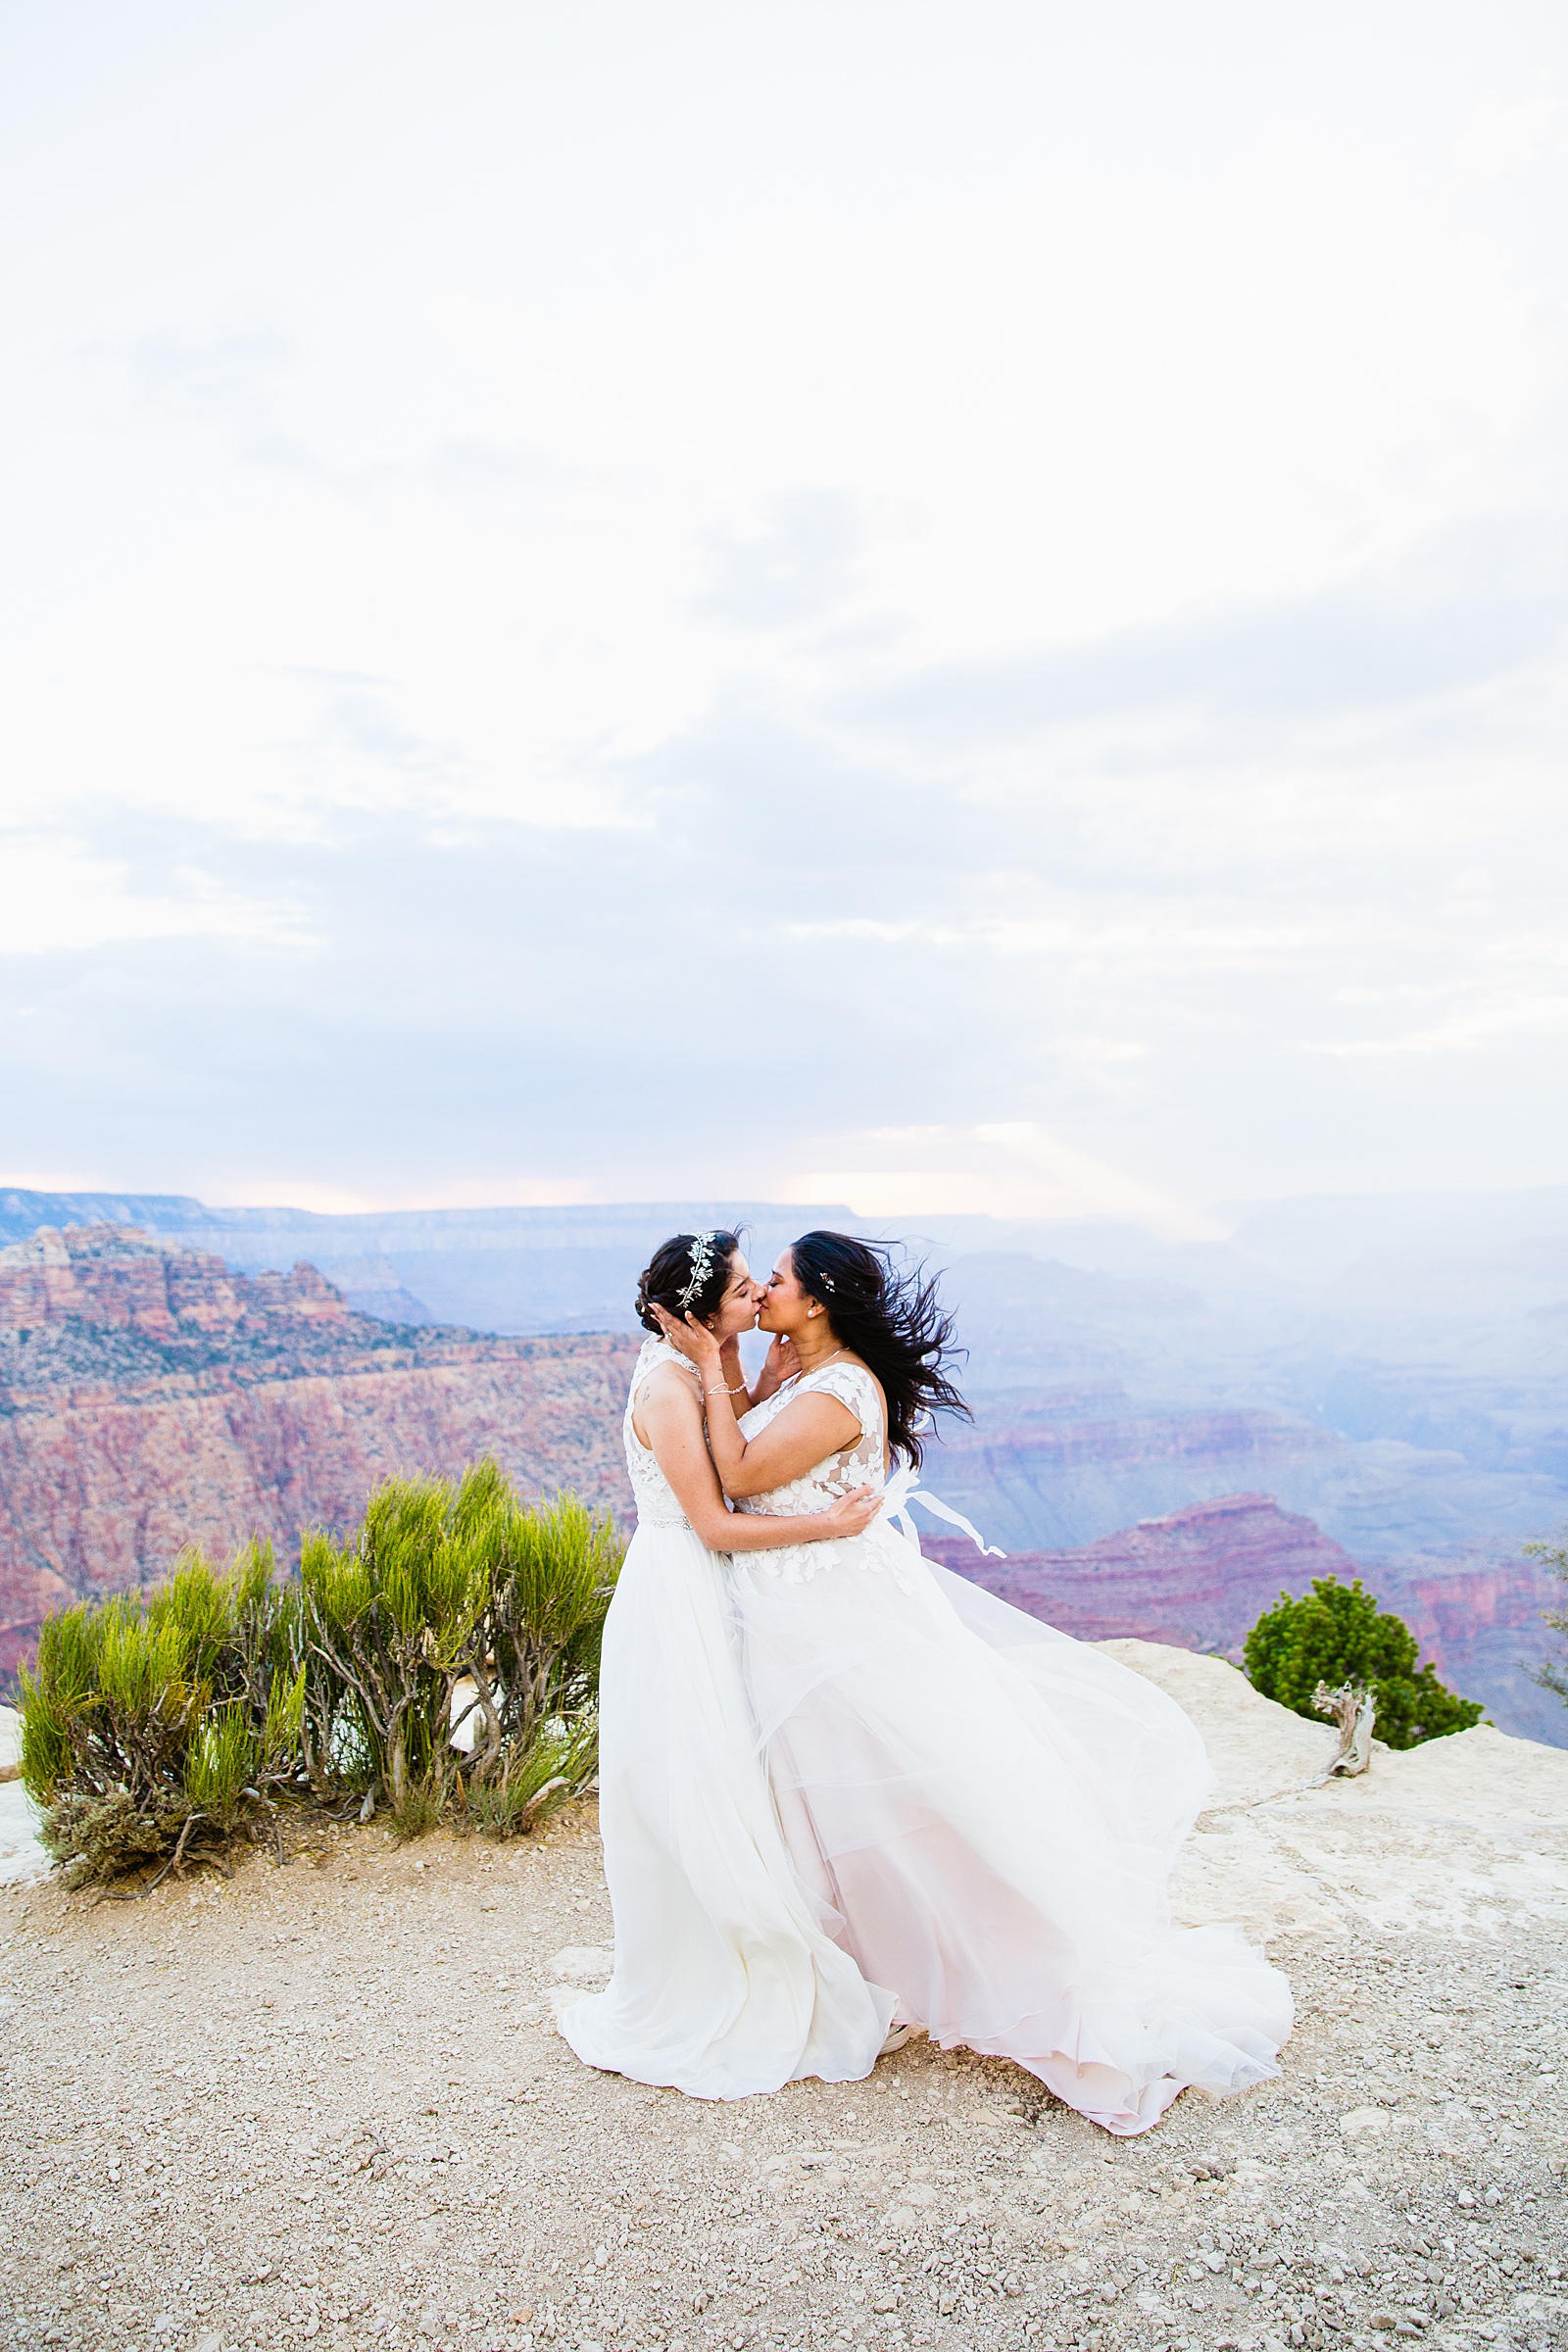 Lesbian couple share their first kiss during their wedding ceremony at Moran Point by Arizona elopement photographer PMA Photography.